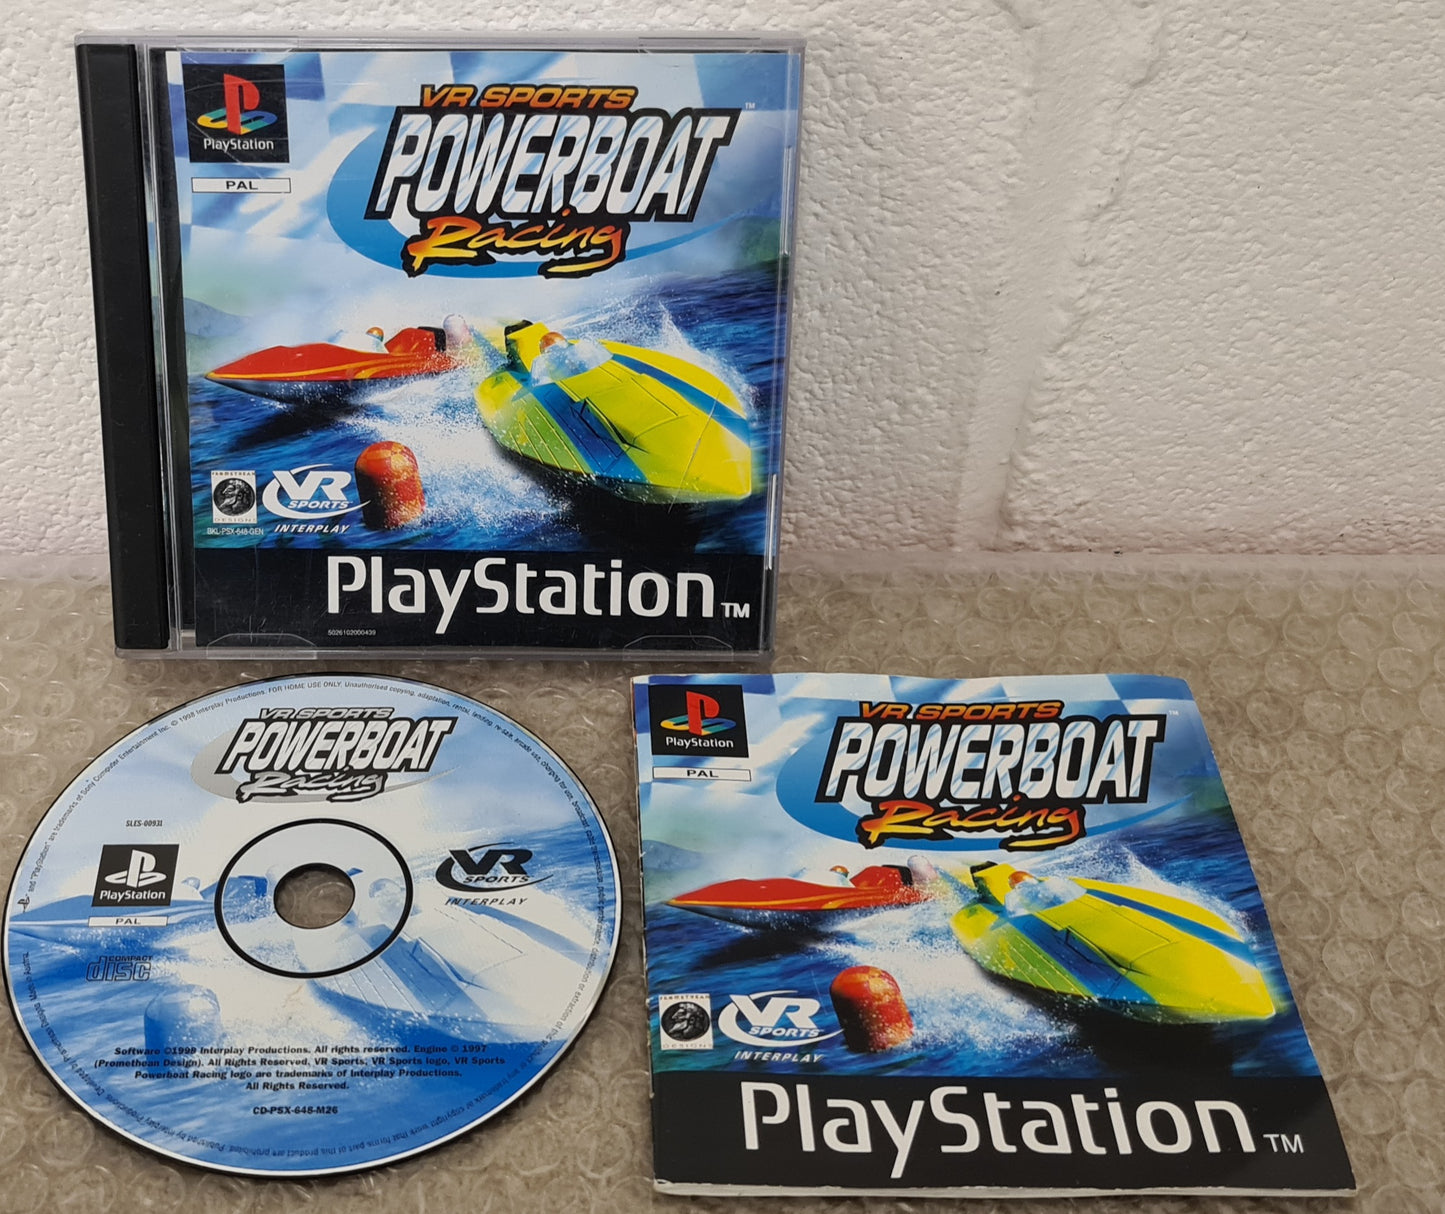 VR Sports Powerboat Racing Sony Playstation 1 (PS1) Game